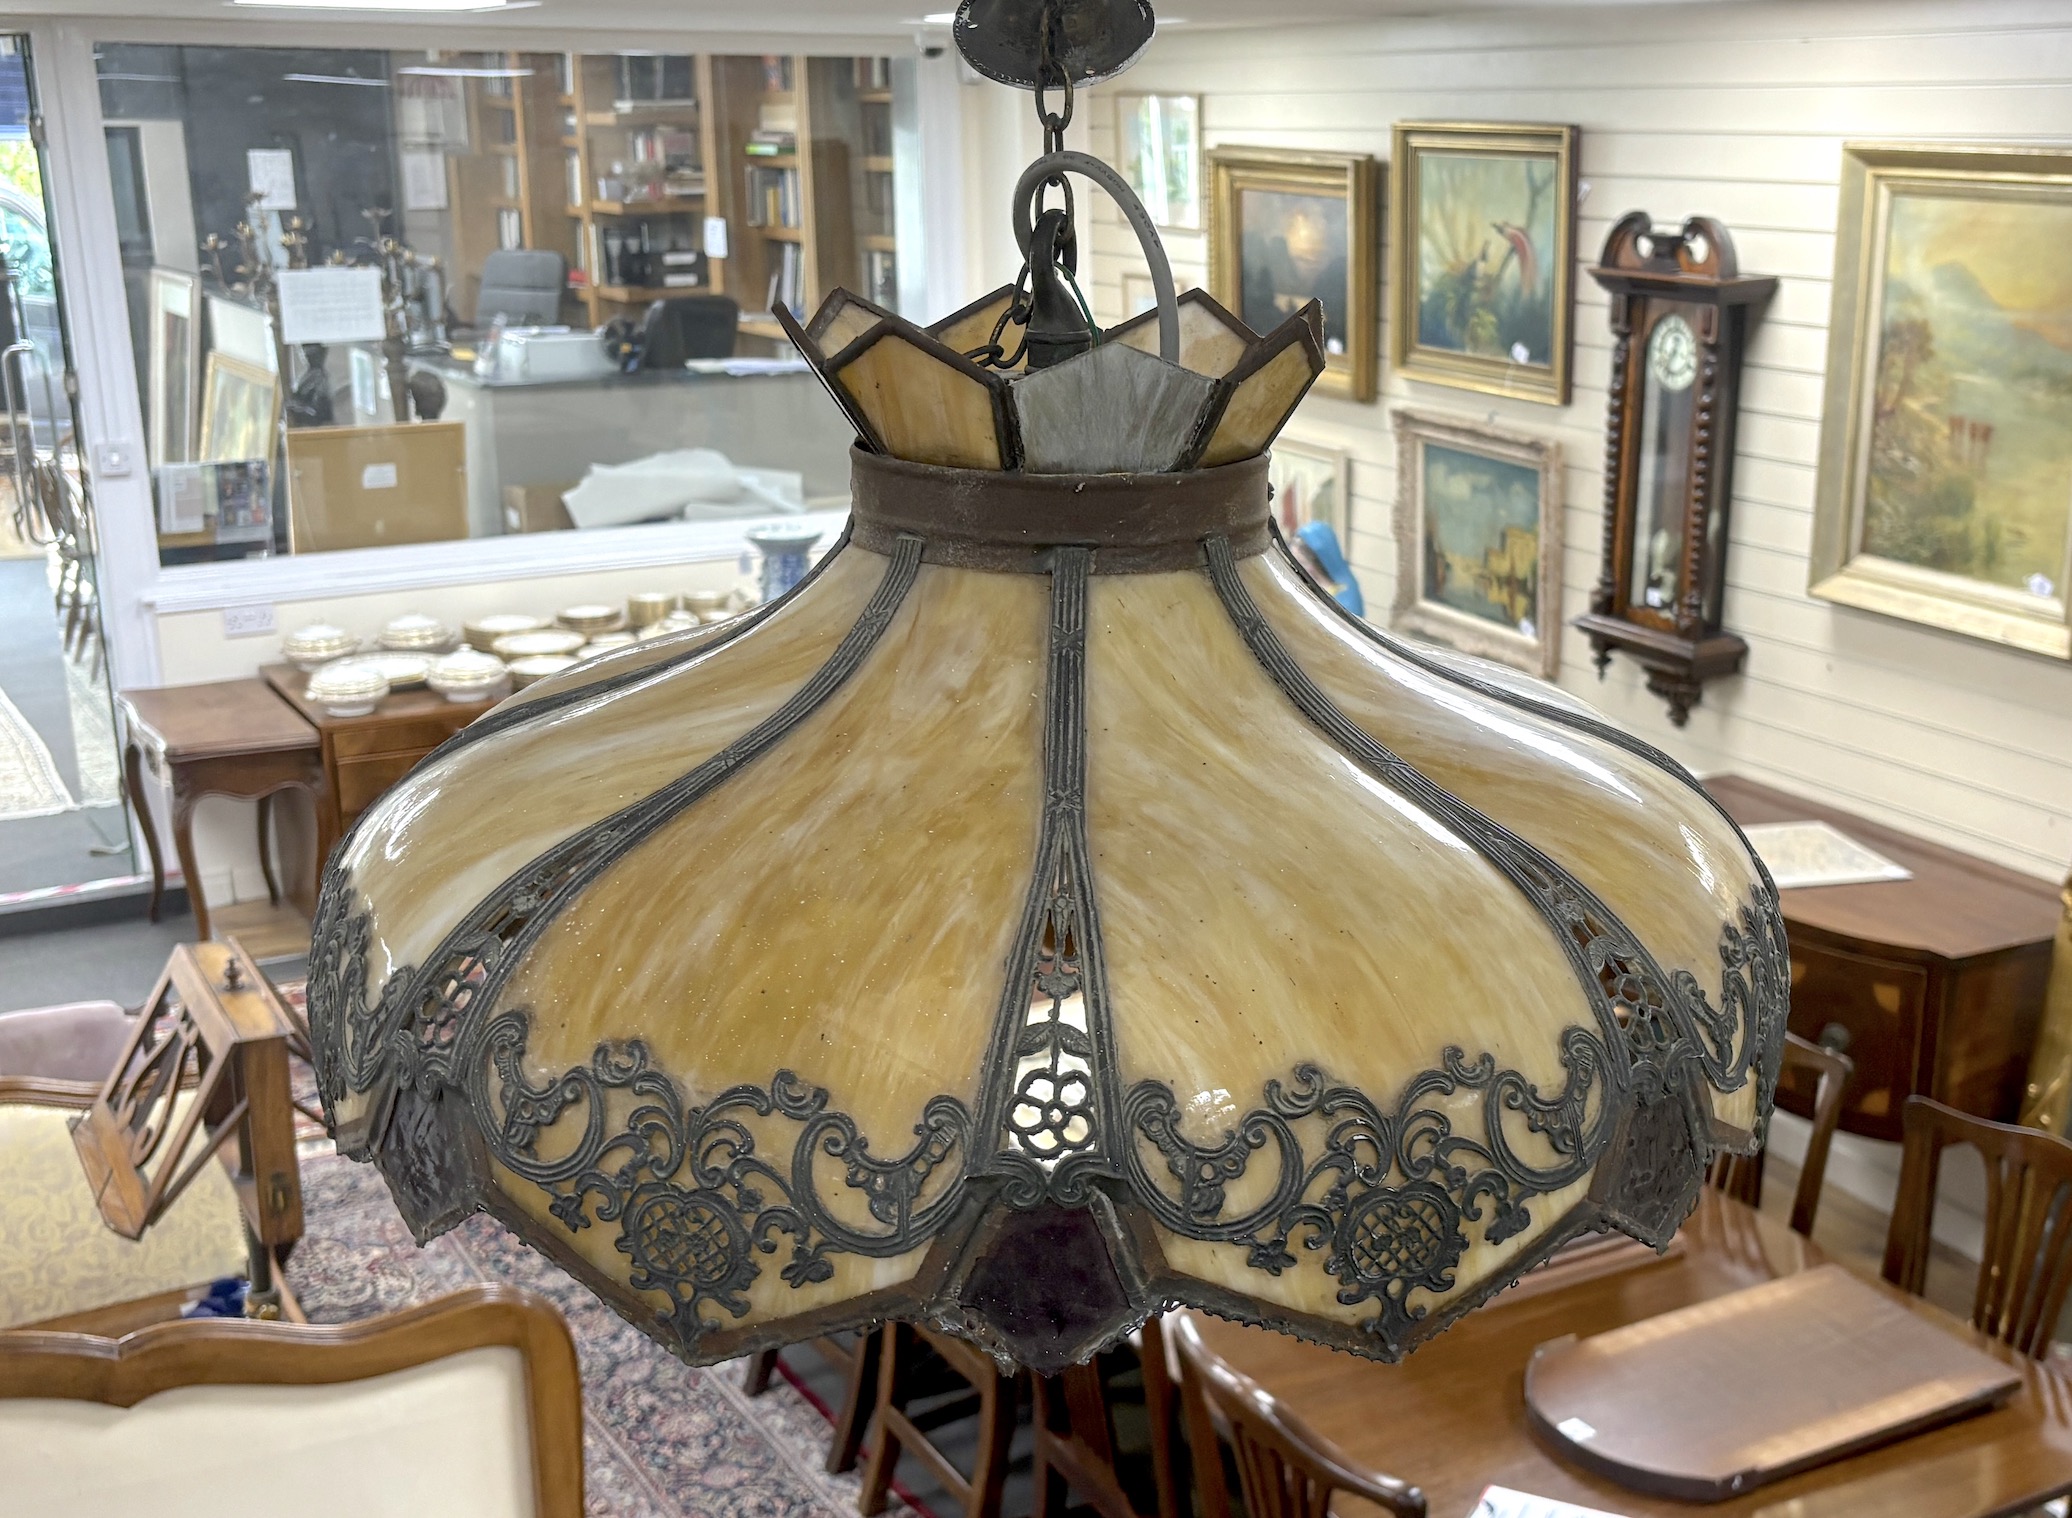 An early 20th century stained glass hanging lamp shade with applied metalwork decoration, shade 56cm diameter